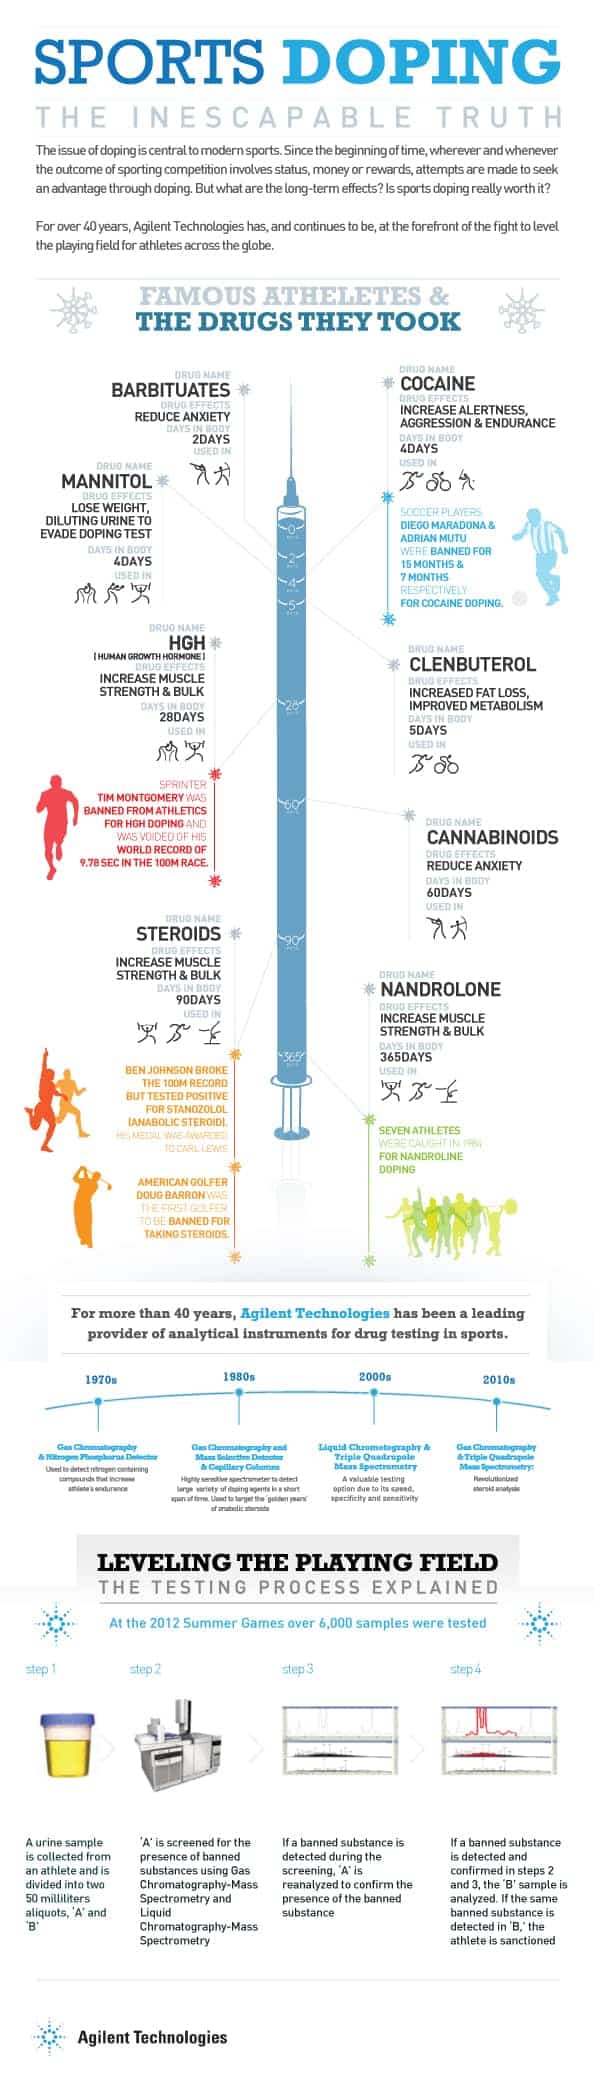 Sports Doping The Inescapable Truth Infographic